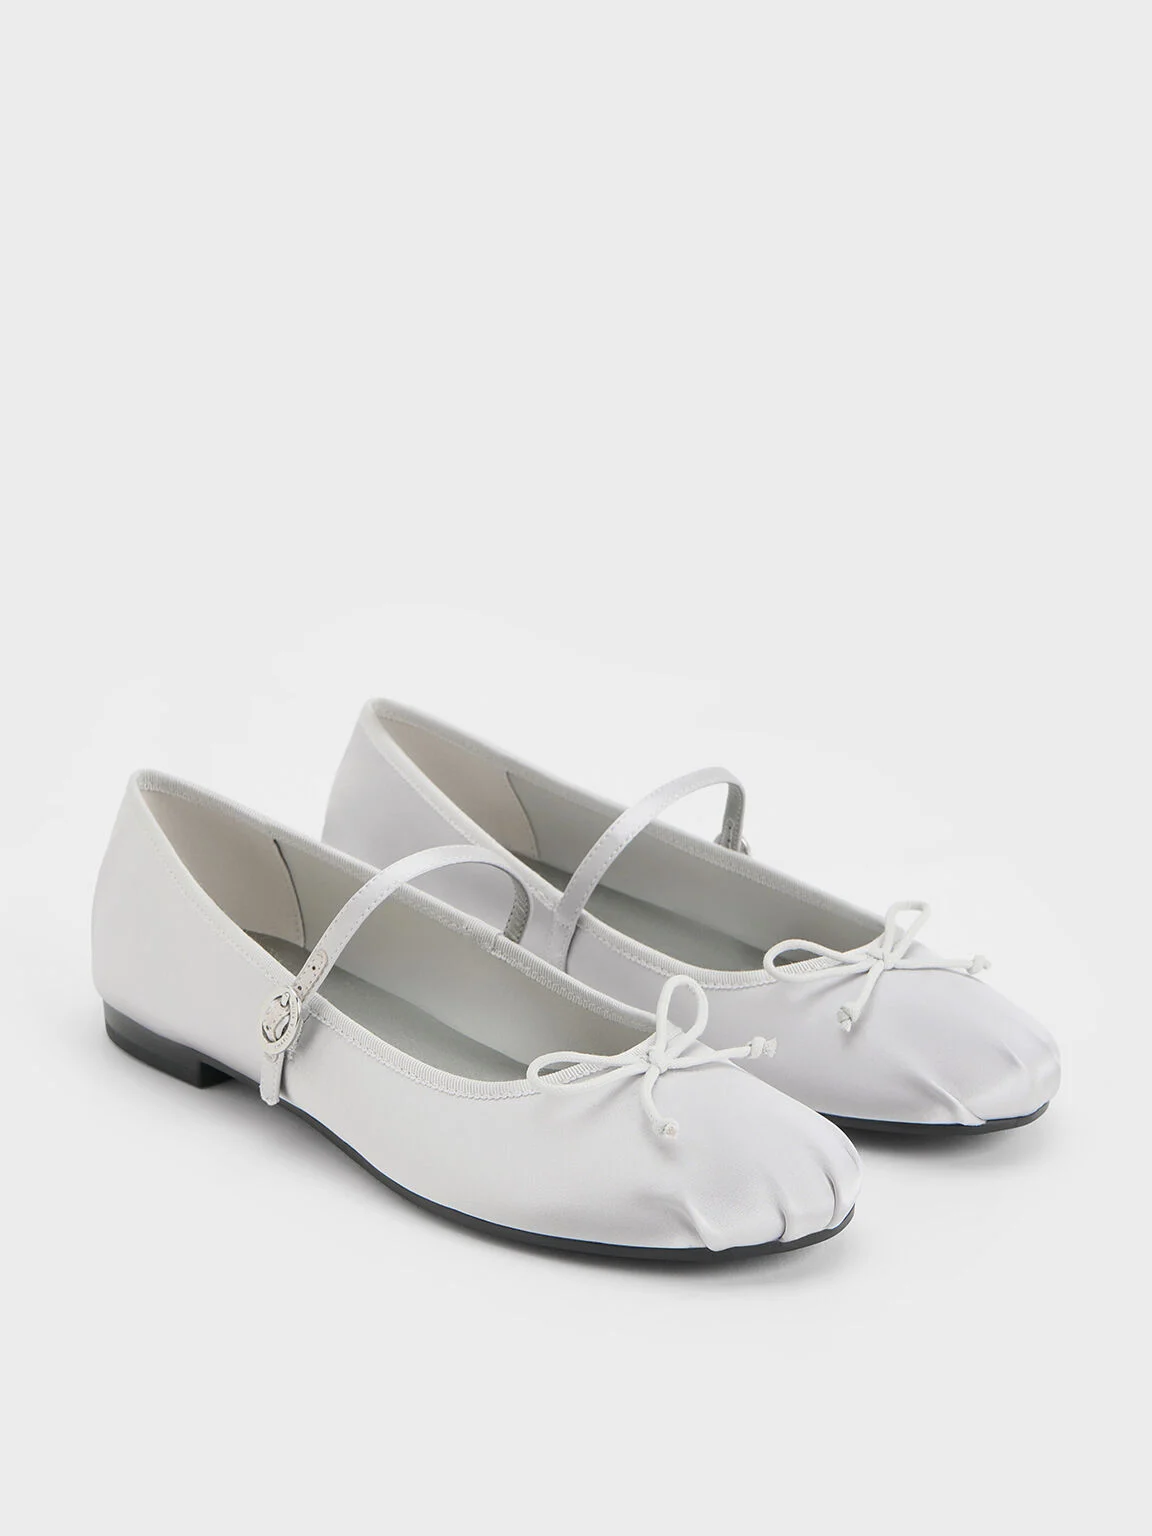 Women’s satin bow Mary Jane Flats in silver - CHARLES & KEITH